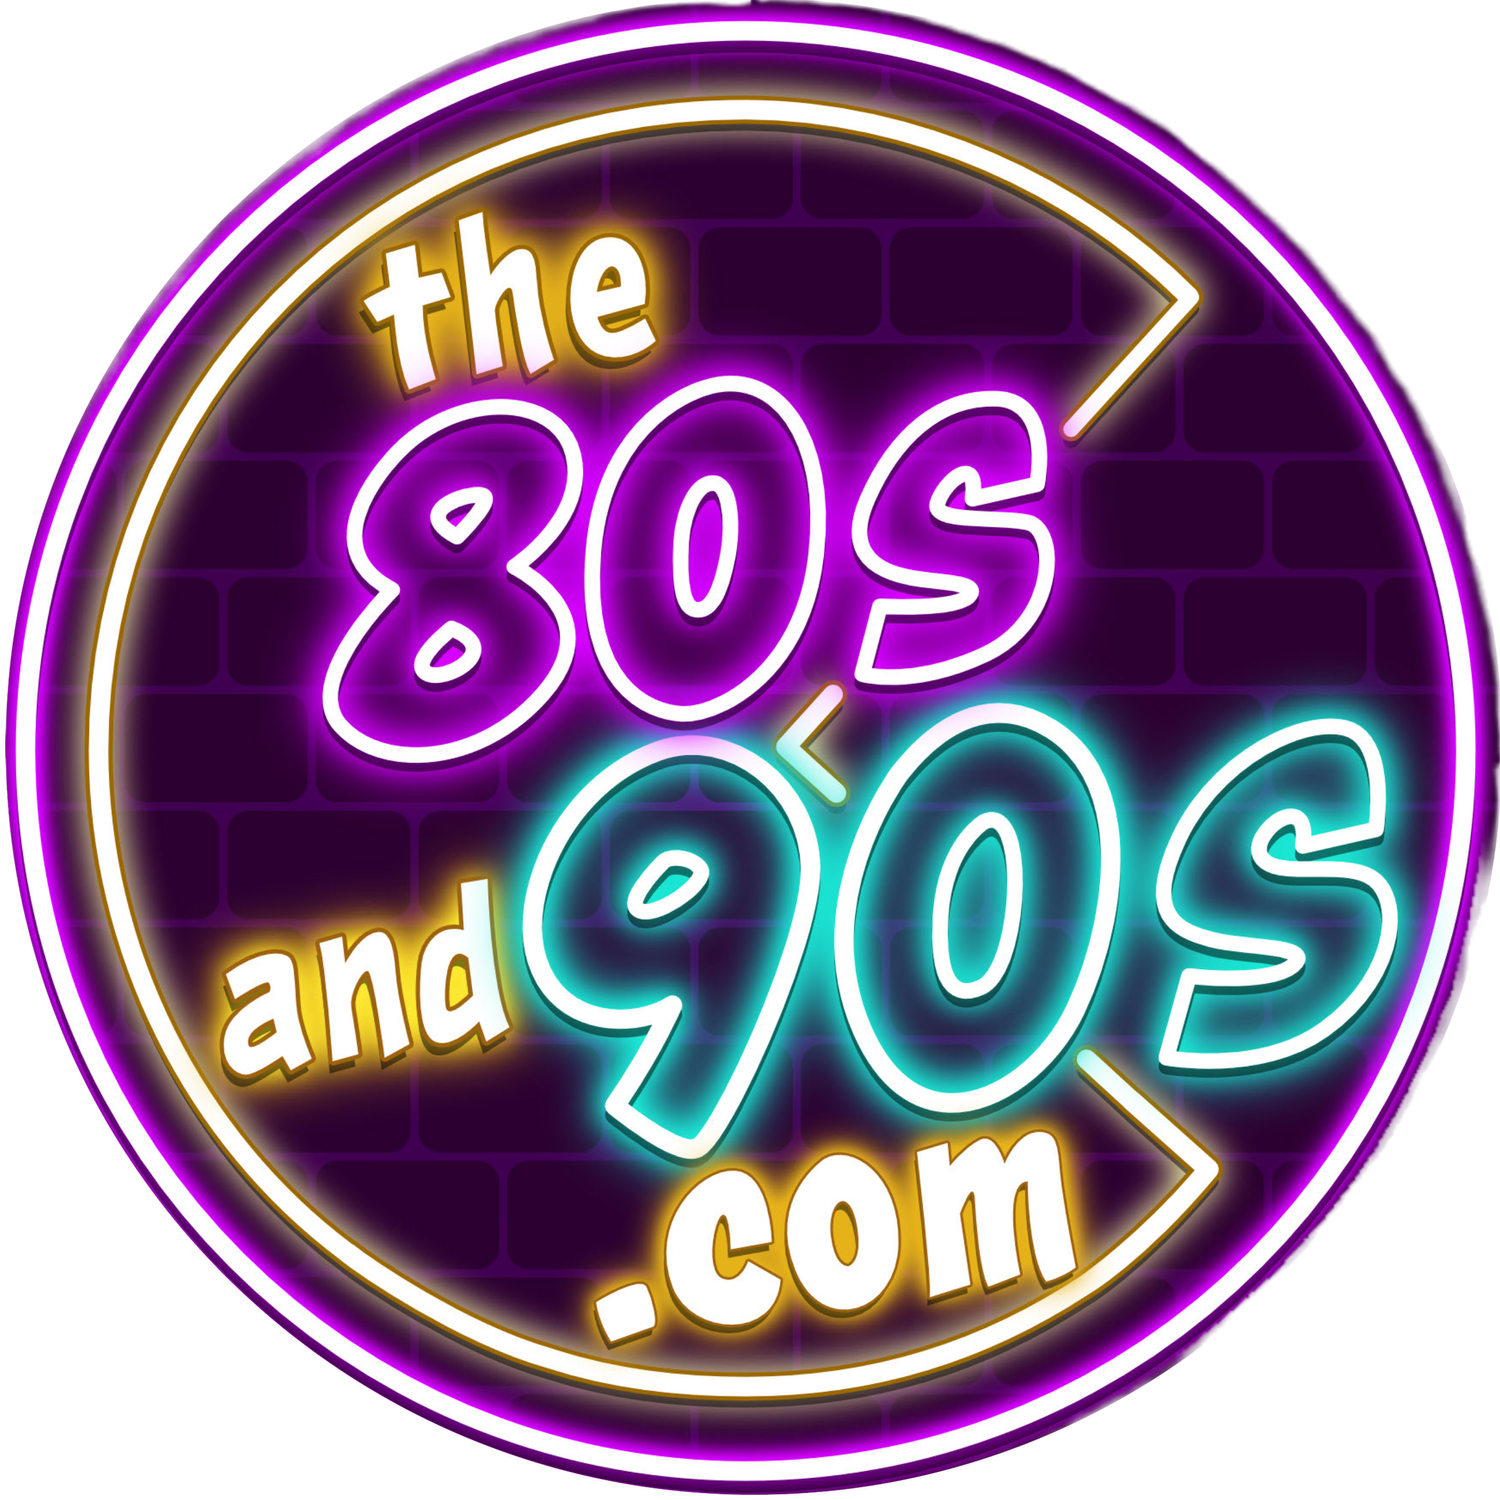 The 80s and 90s